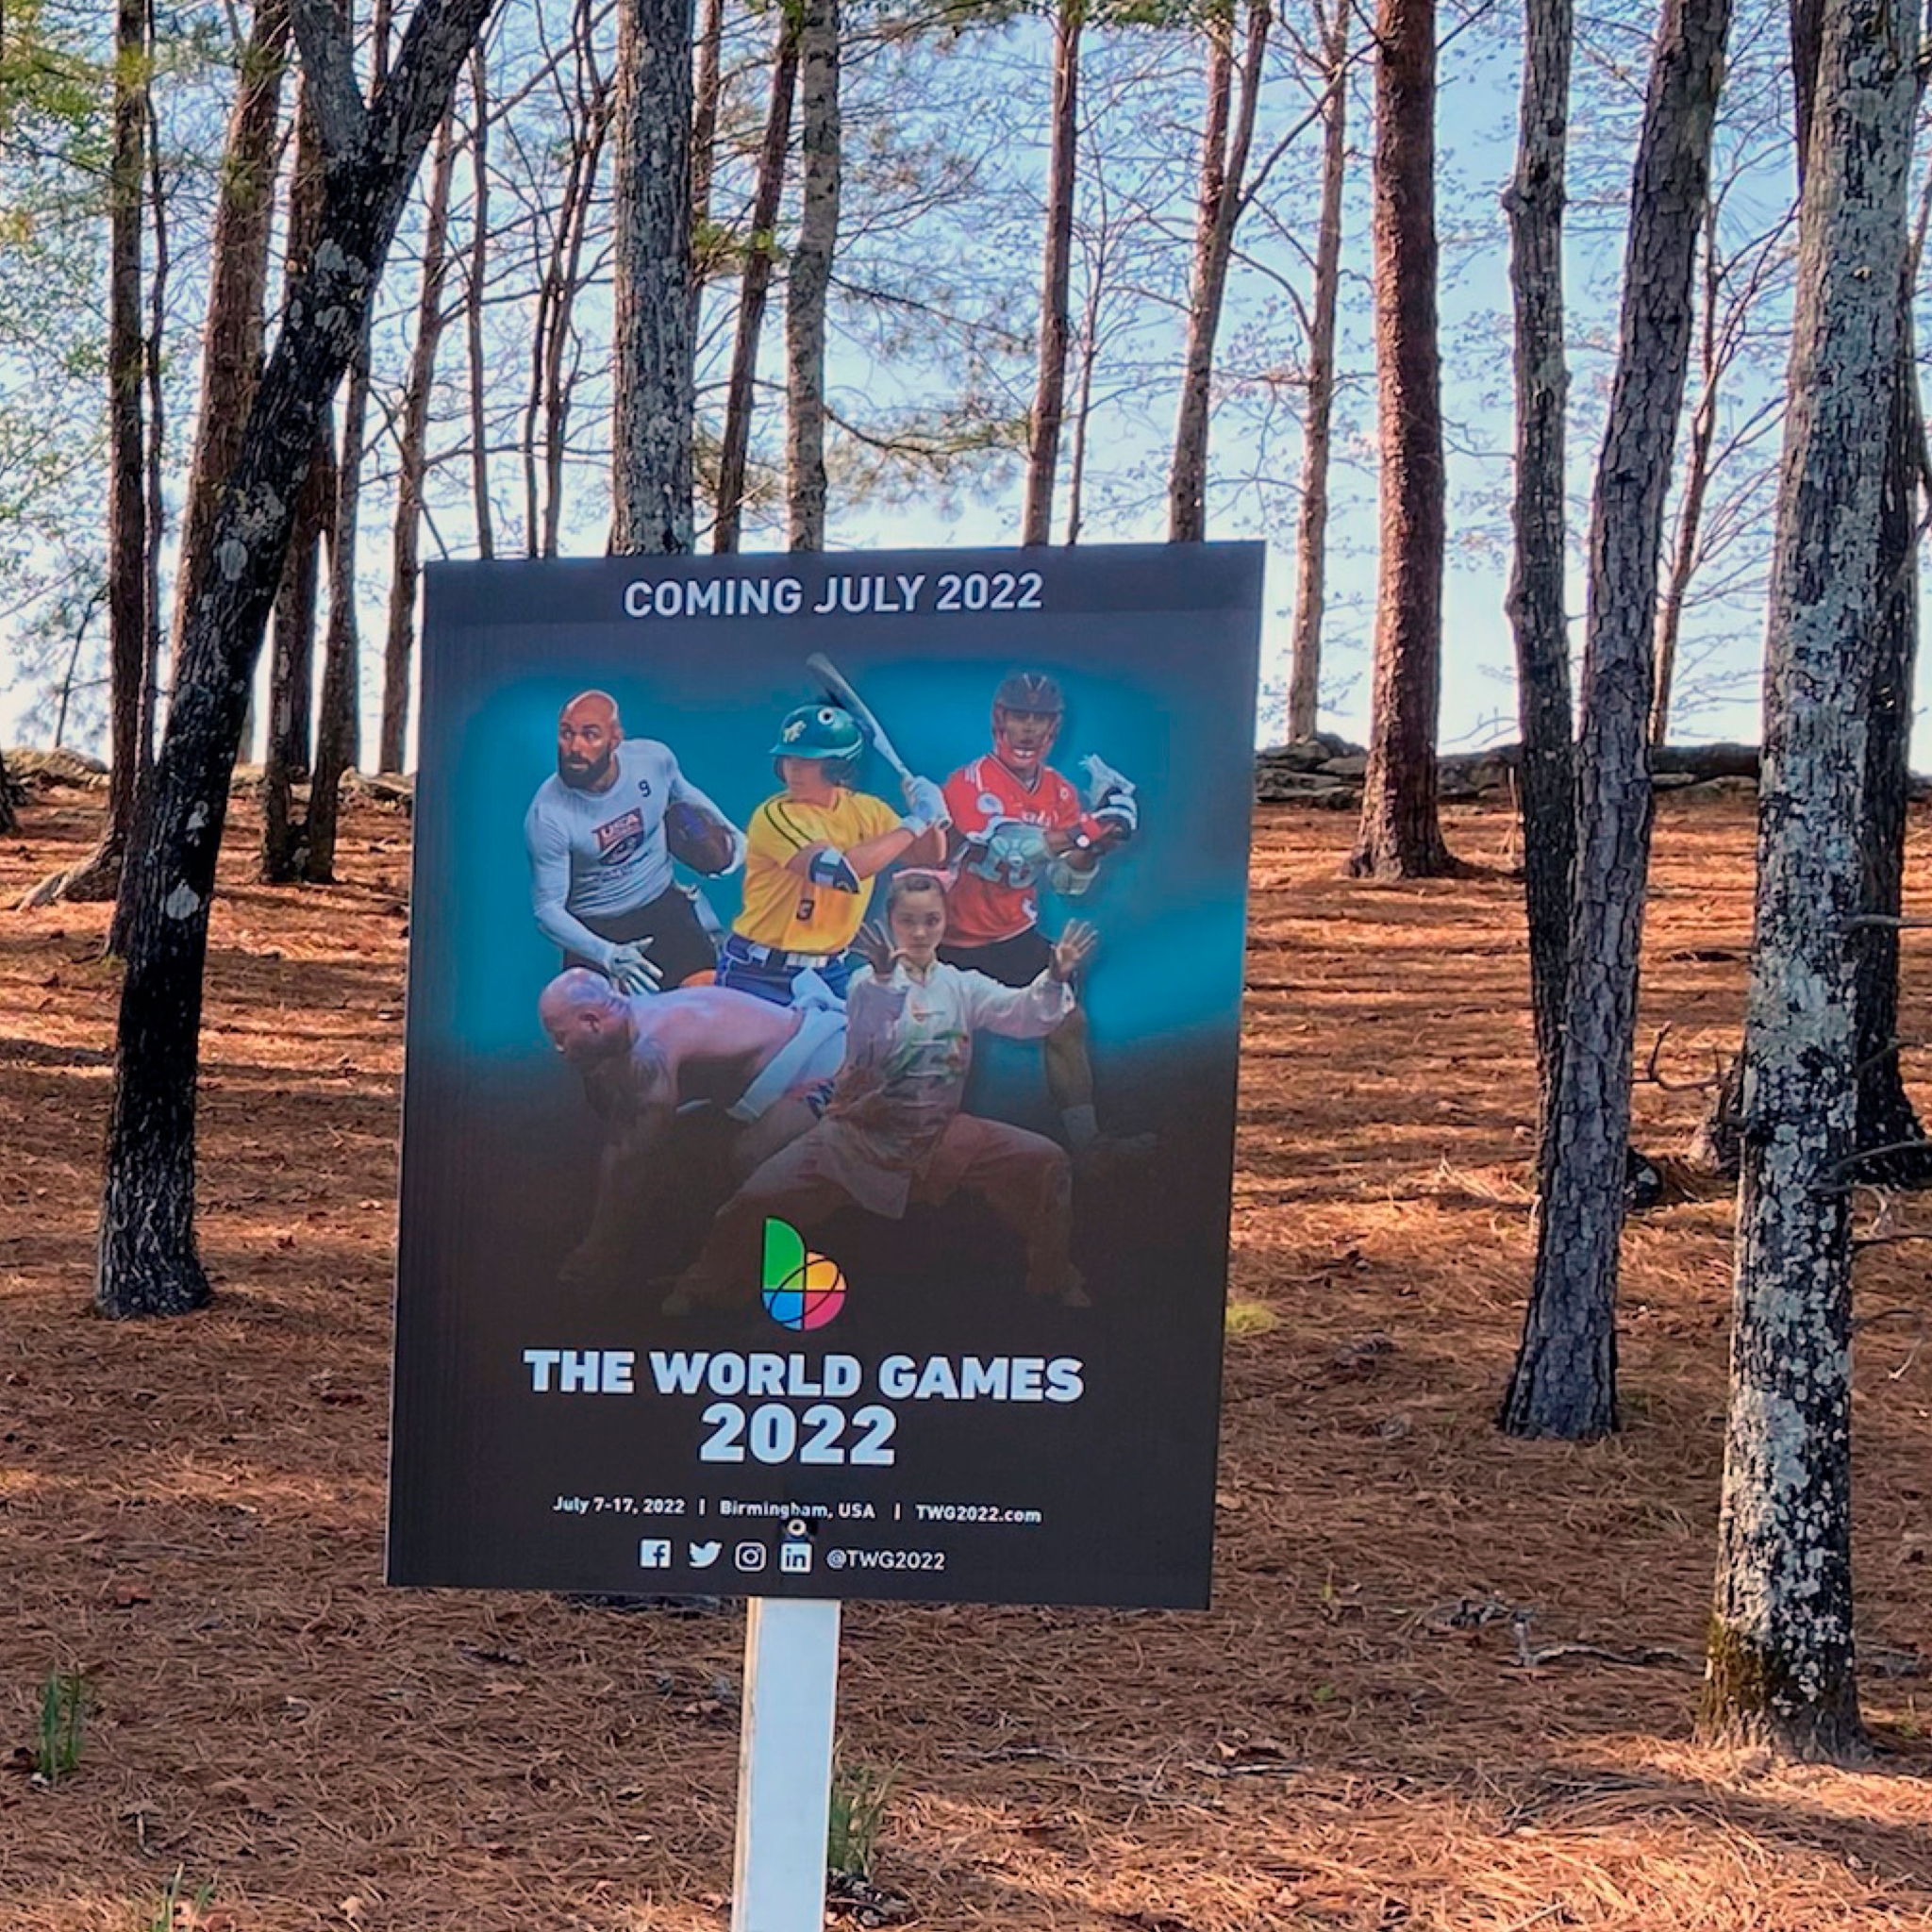 Sign of the world games in a field